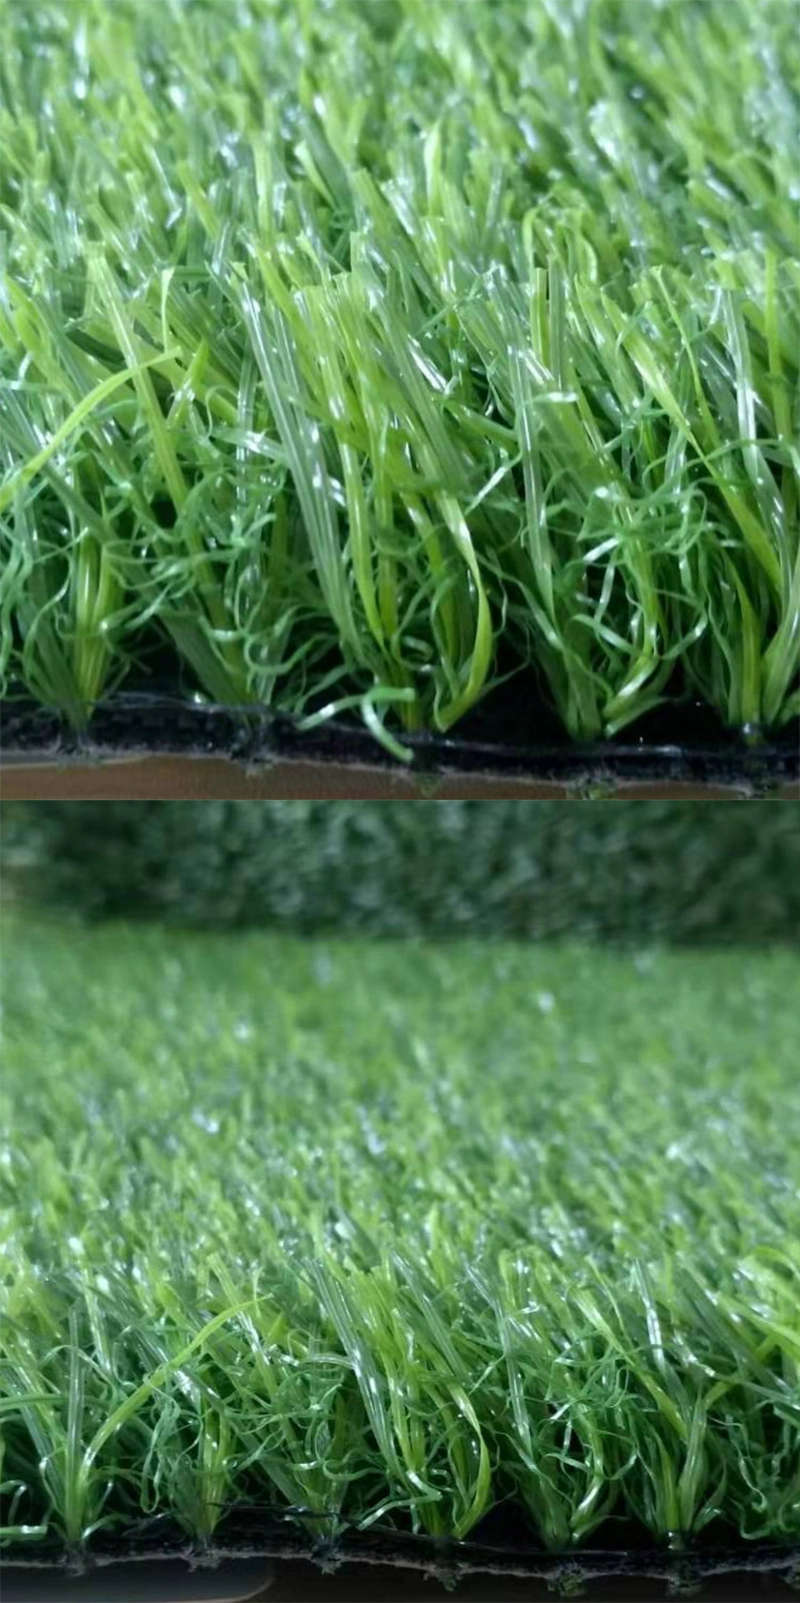 Chinese Suppliers High Performance Artificial Grass for Tennis Court